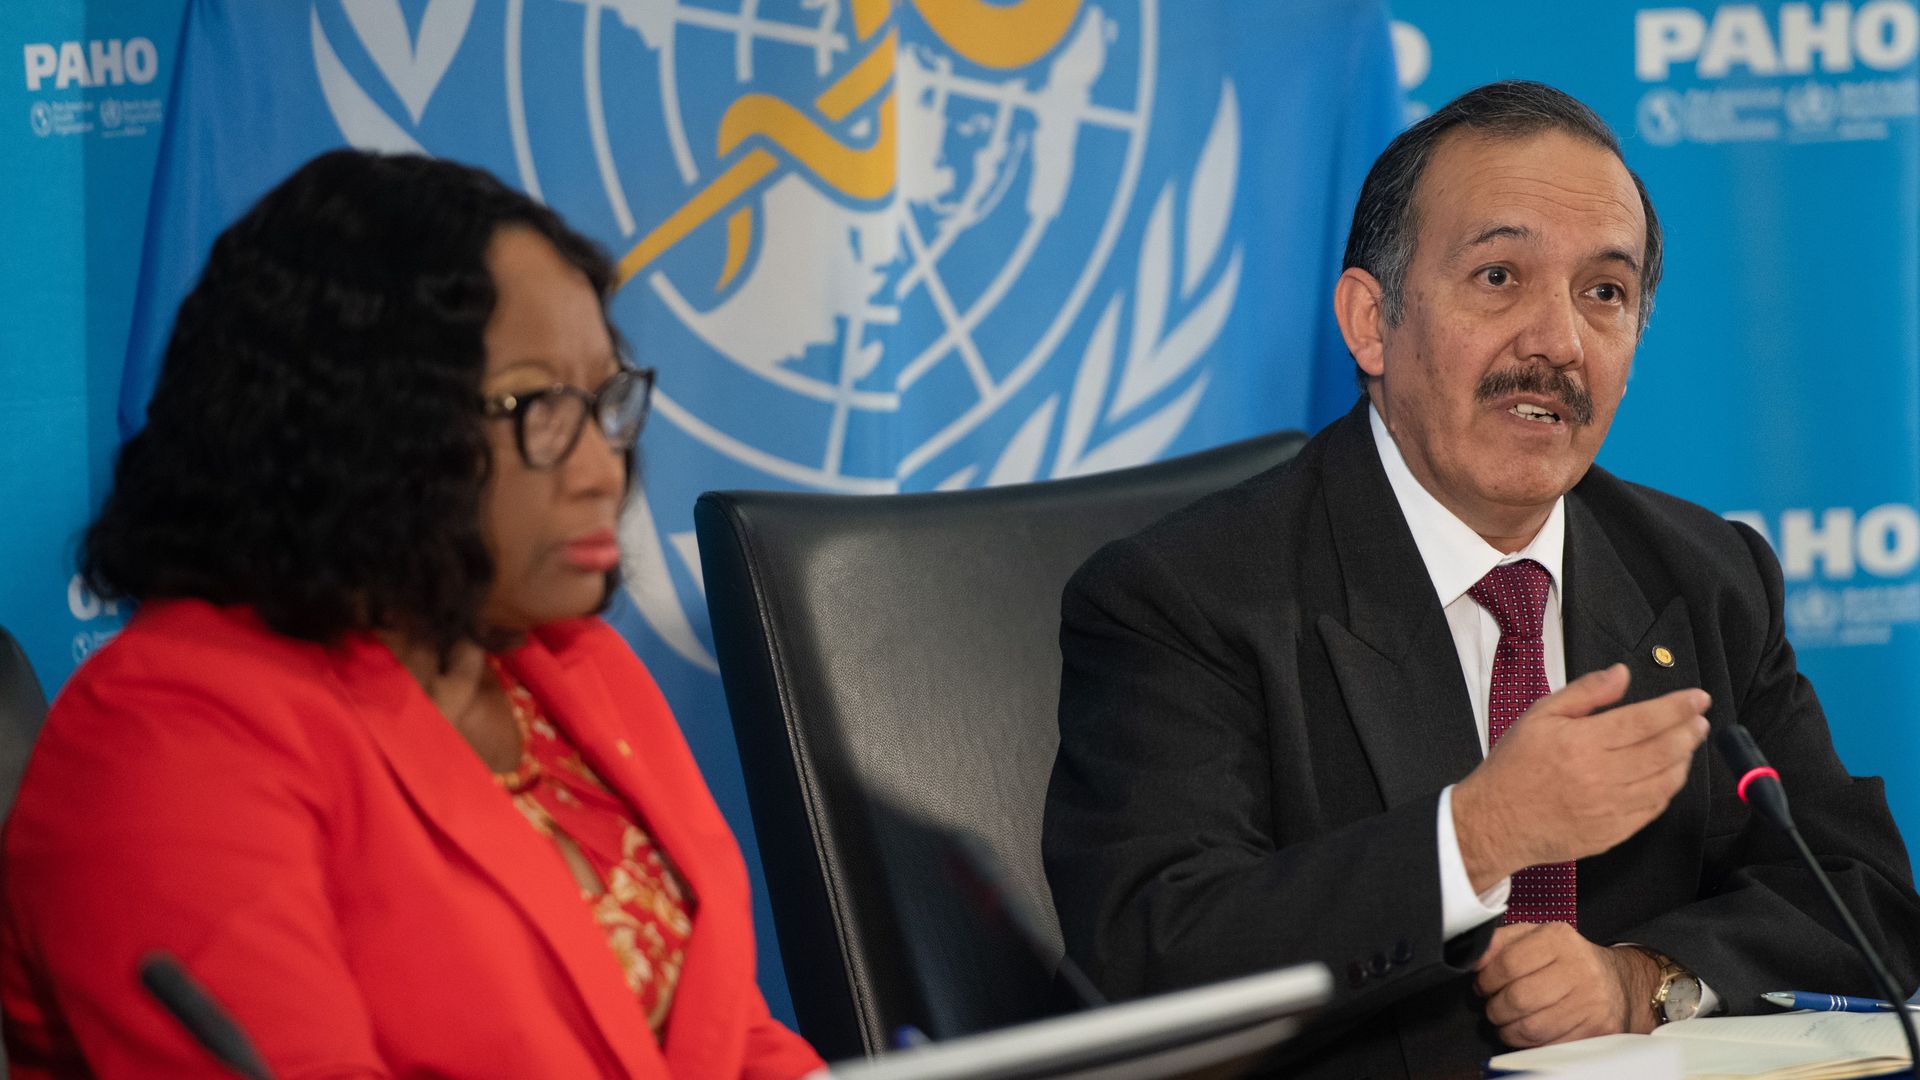 Dr. Ciro Ugarte (R), Pan American Health Organization chief, and PAHO's Dr. Carissa Etienne (L), hold a press briefing about the Coronavirus at PAHO Headquarters in Washington, DC, March 6, 2020.